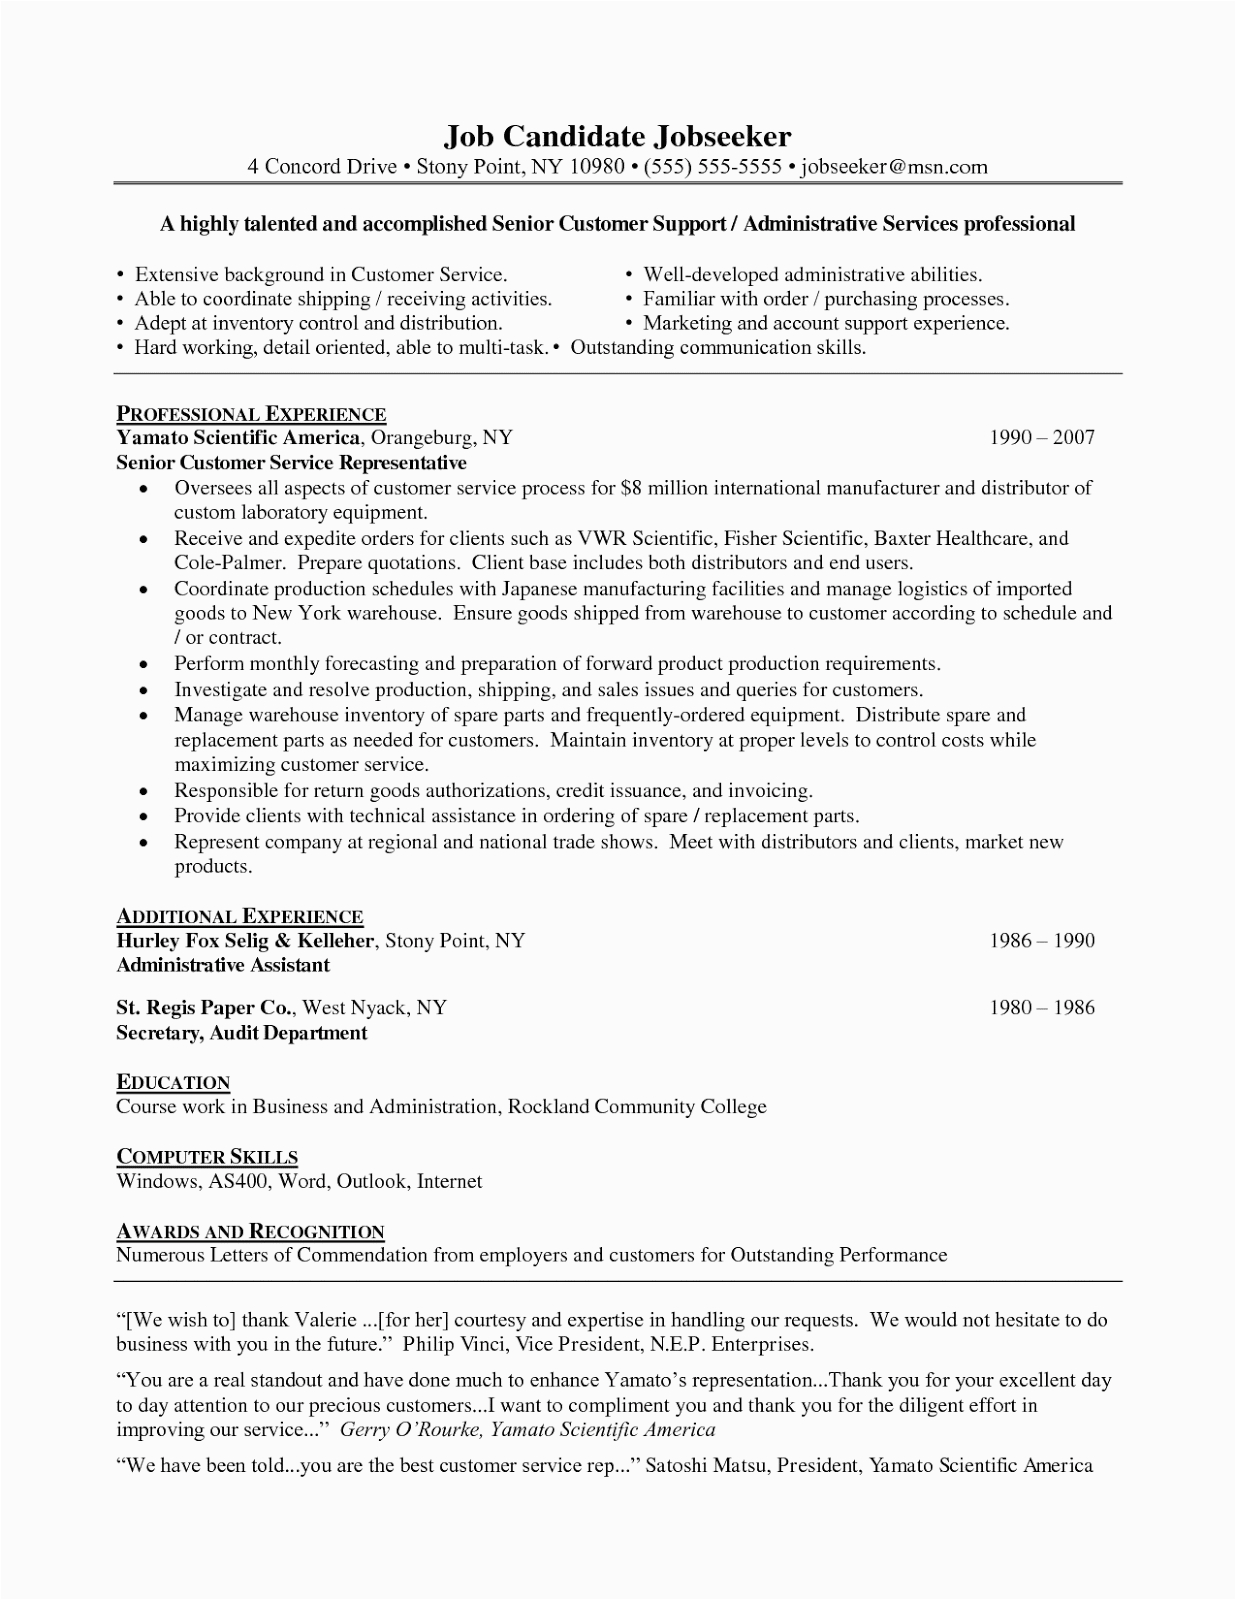 Sample Resume Objective Statements for Customer Service Career Objective for Customer Service Resume Tipss Und